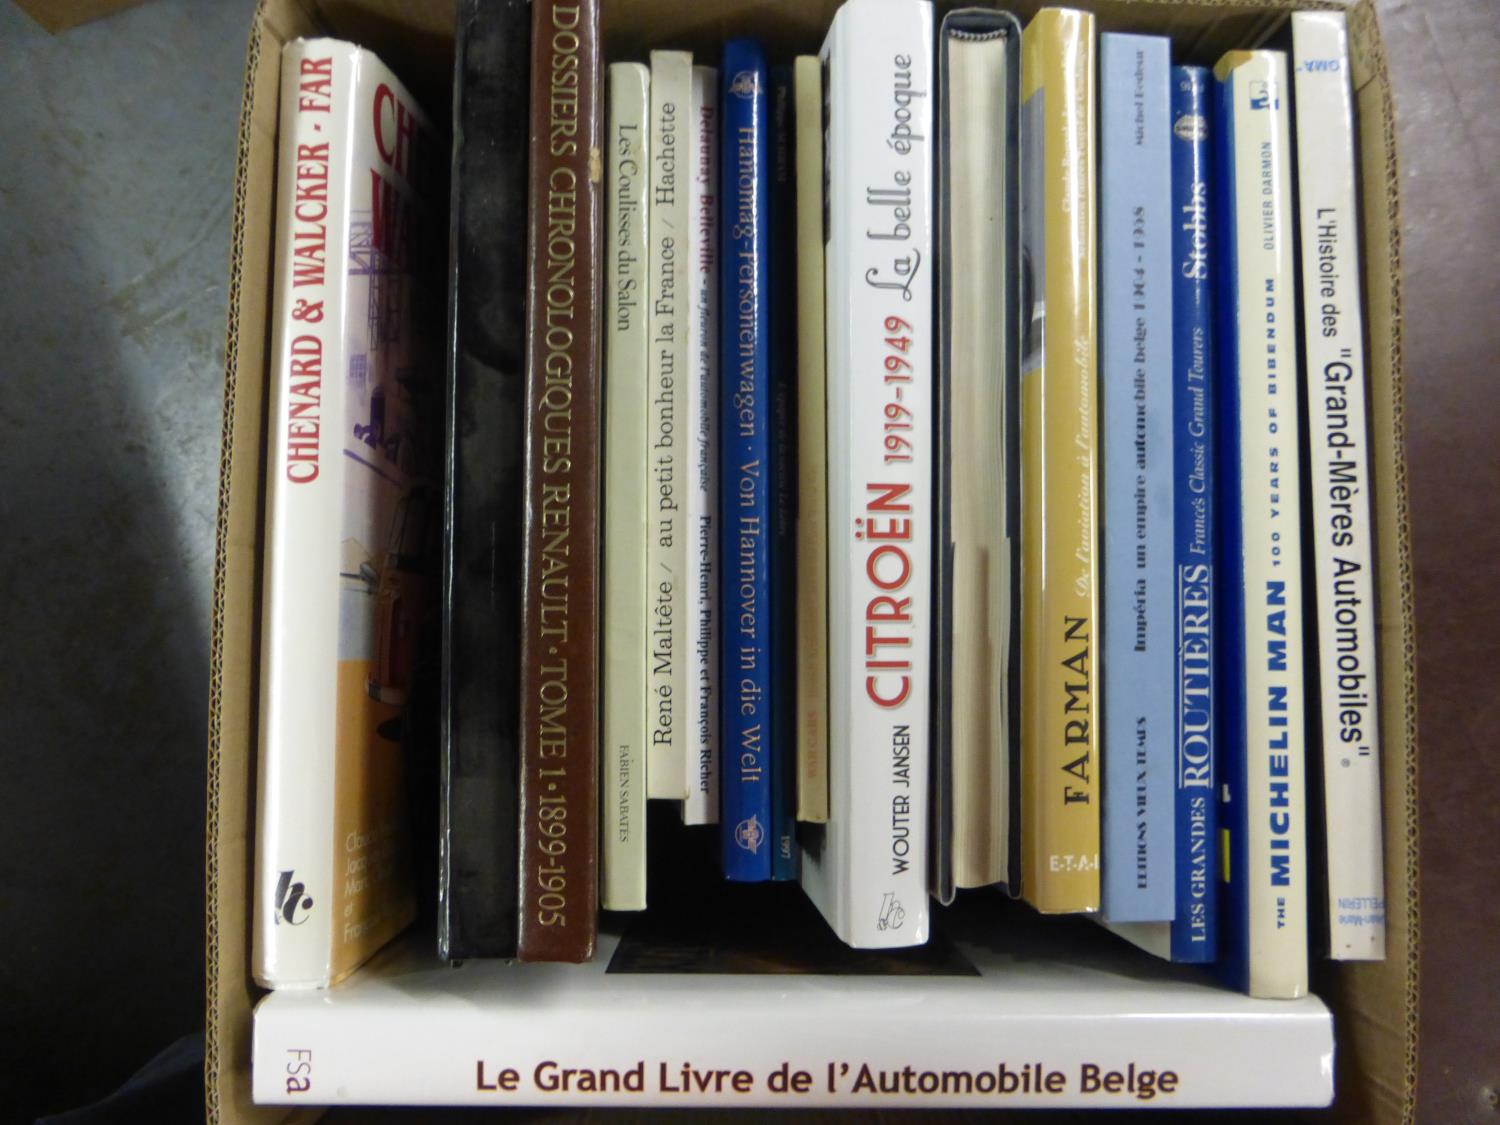 A Box of Large Format Books. Le Grand Livre de l'Automobile Belge; Hispano Suiza by d'Andres with